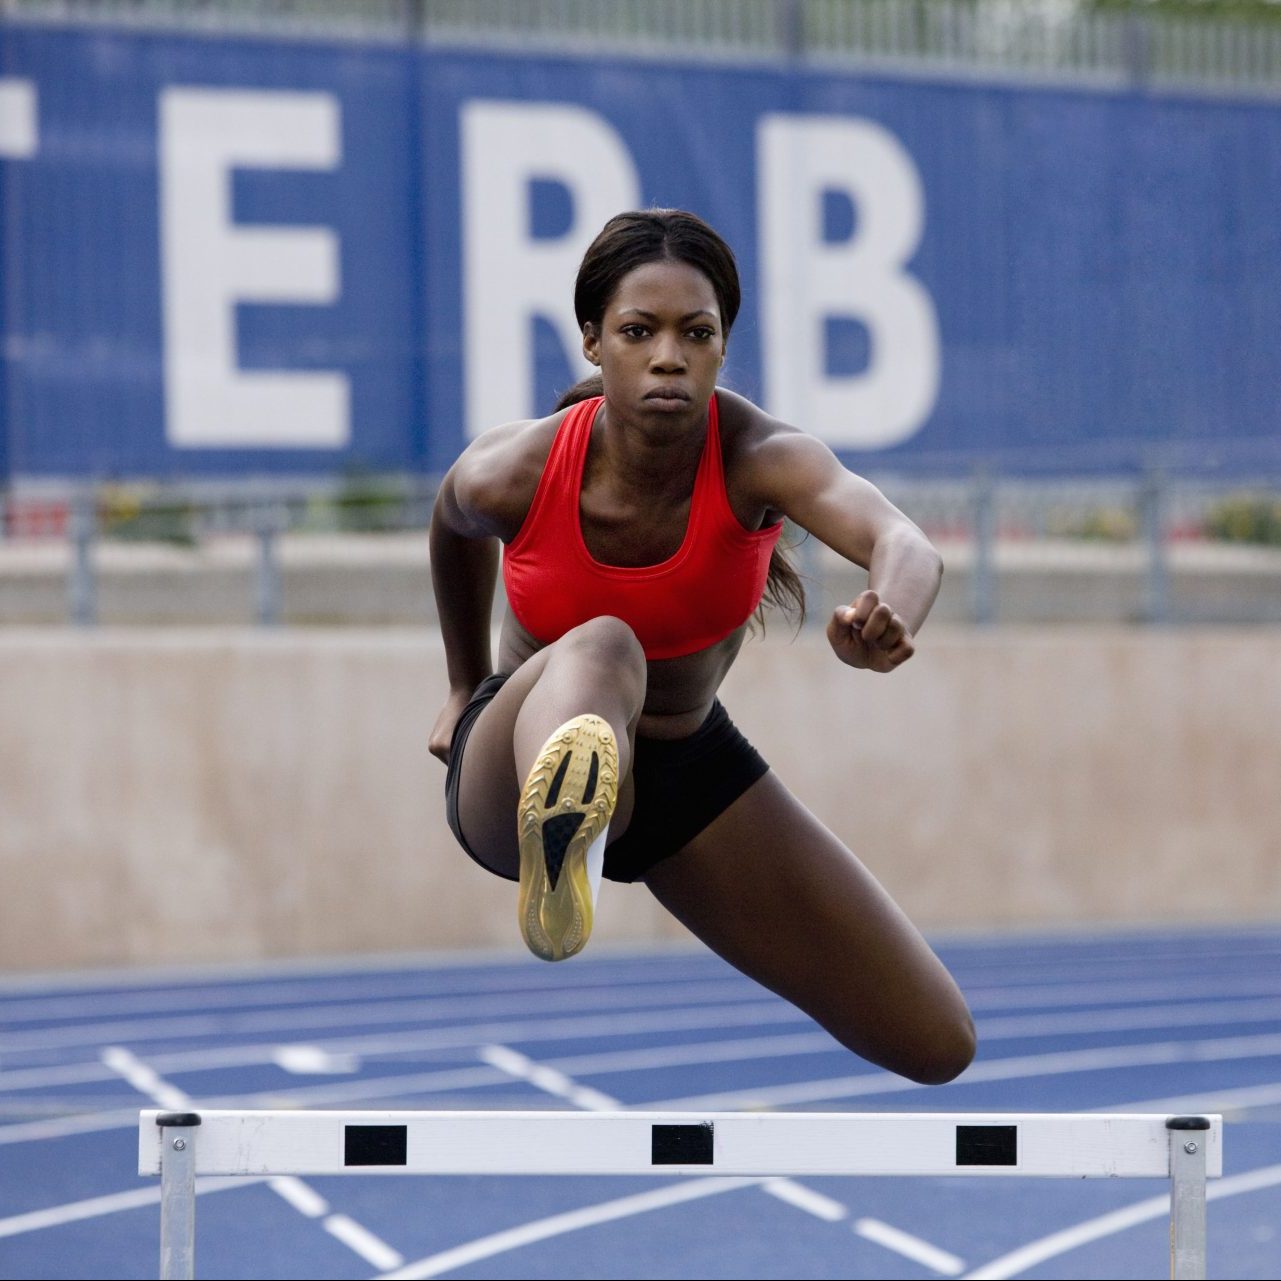 Woman in red sports bra jumps over hurdle.